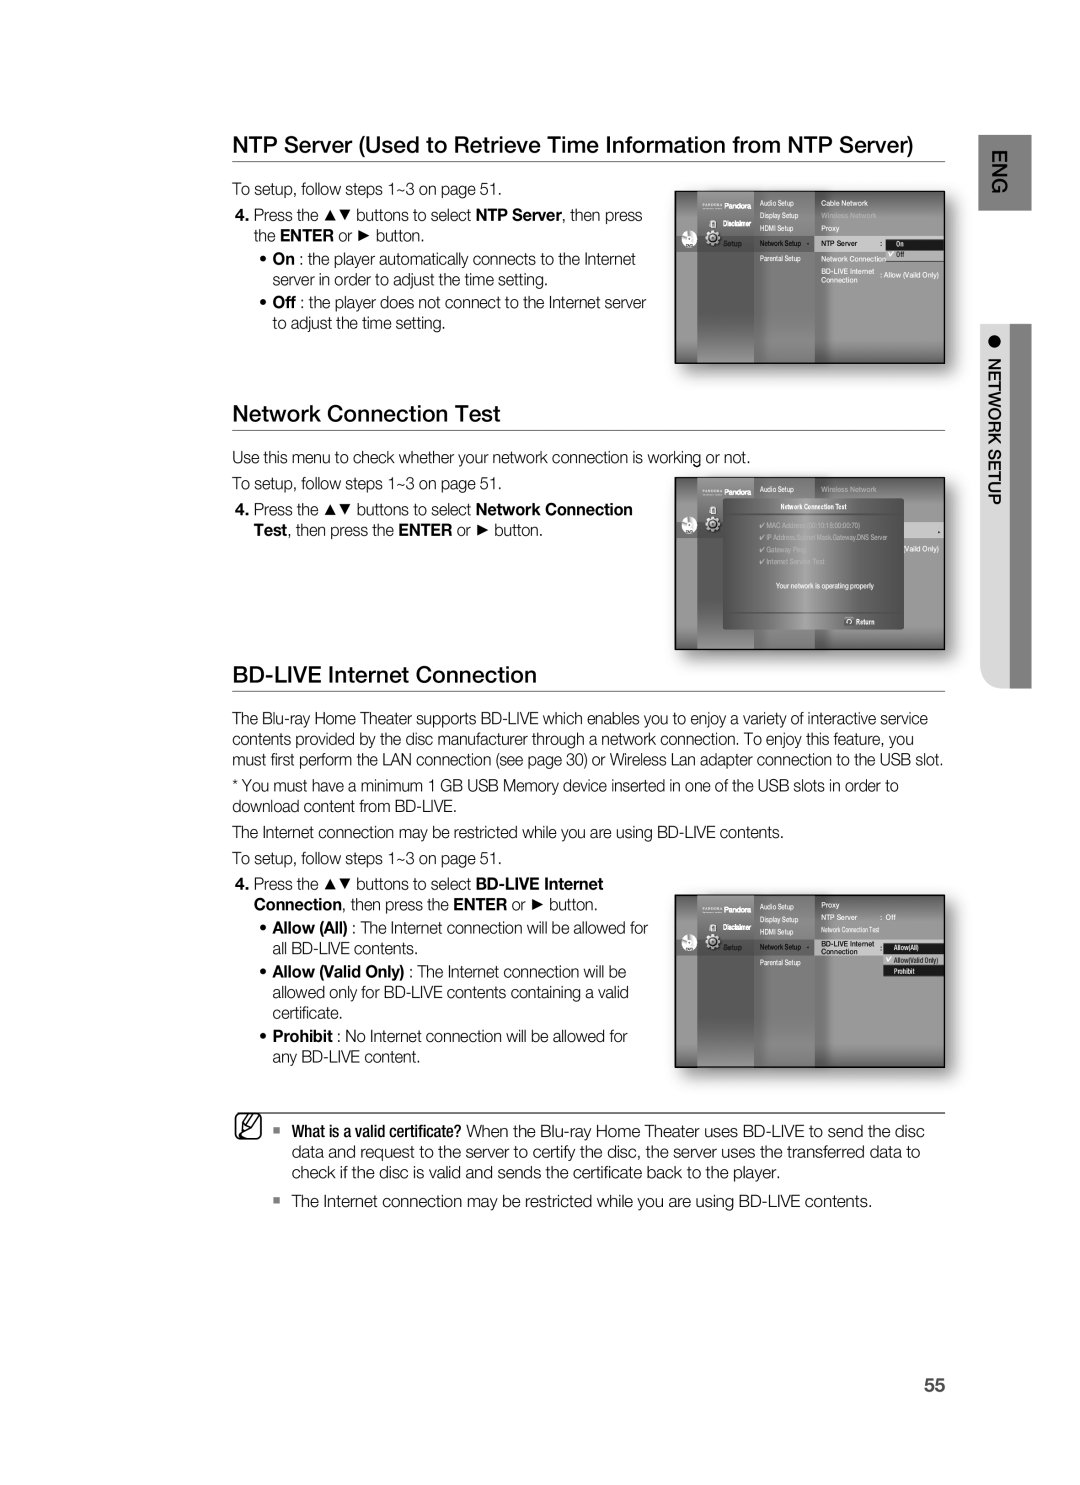 Samsung HT-BD1200 user manual NTP Server Used to Retrieve Time Information from NTP Server, Network Connection Test, button 